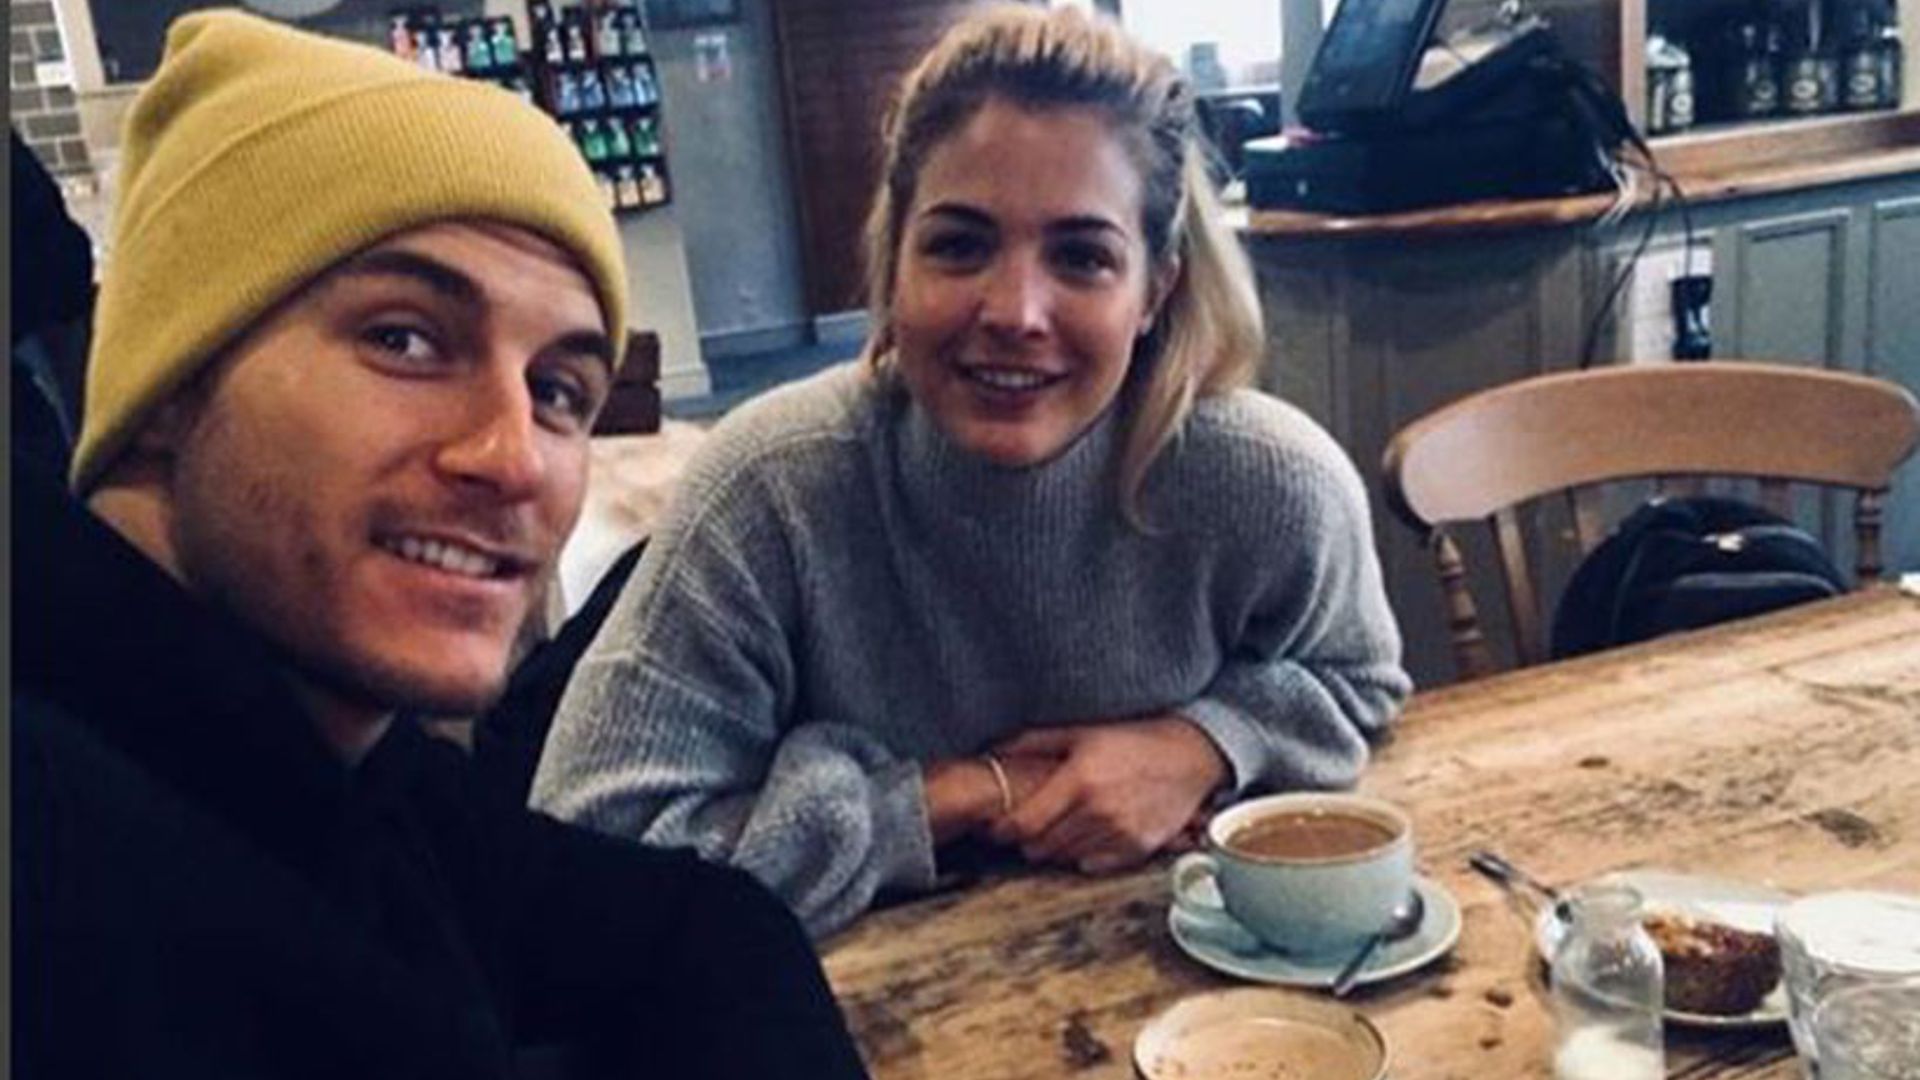 Gemma Atkinson finally confirms romance with Strictly's Gorka Marquez with romantic snap